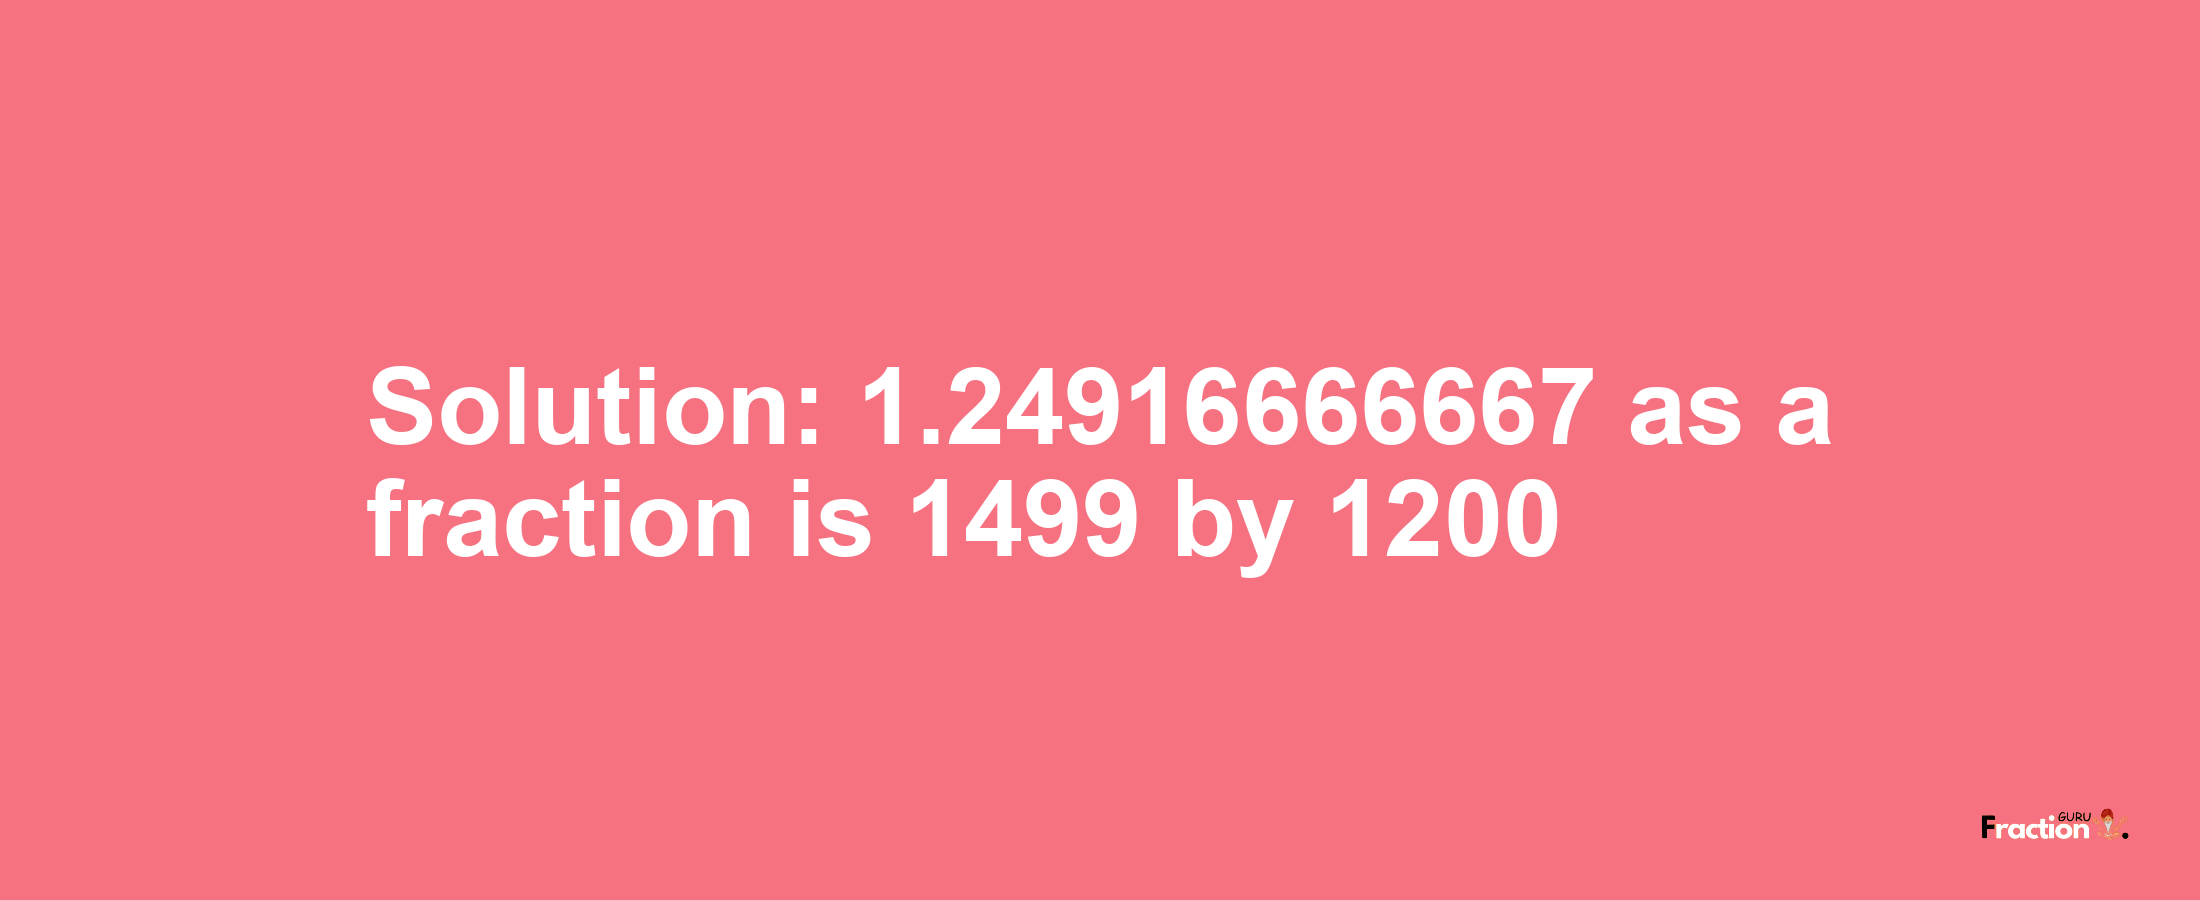 Solution:1.24916666667 as a fraction is 1499/1200